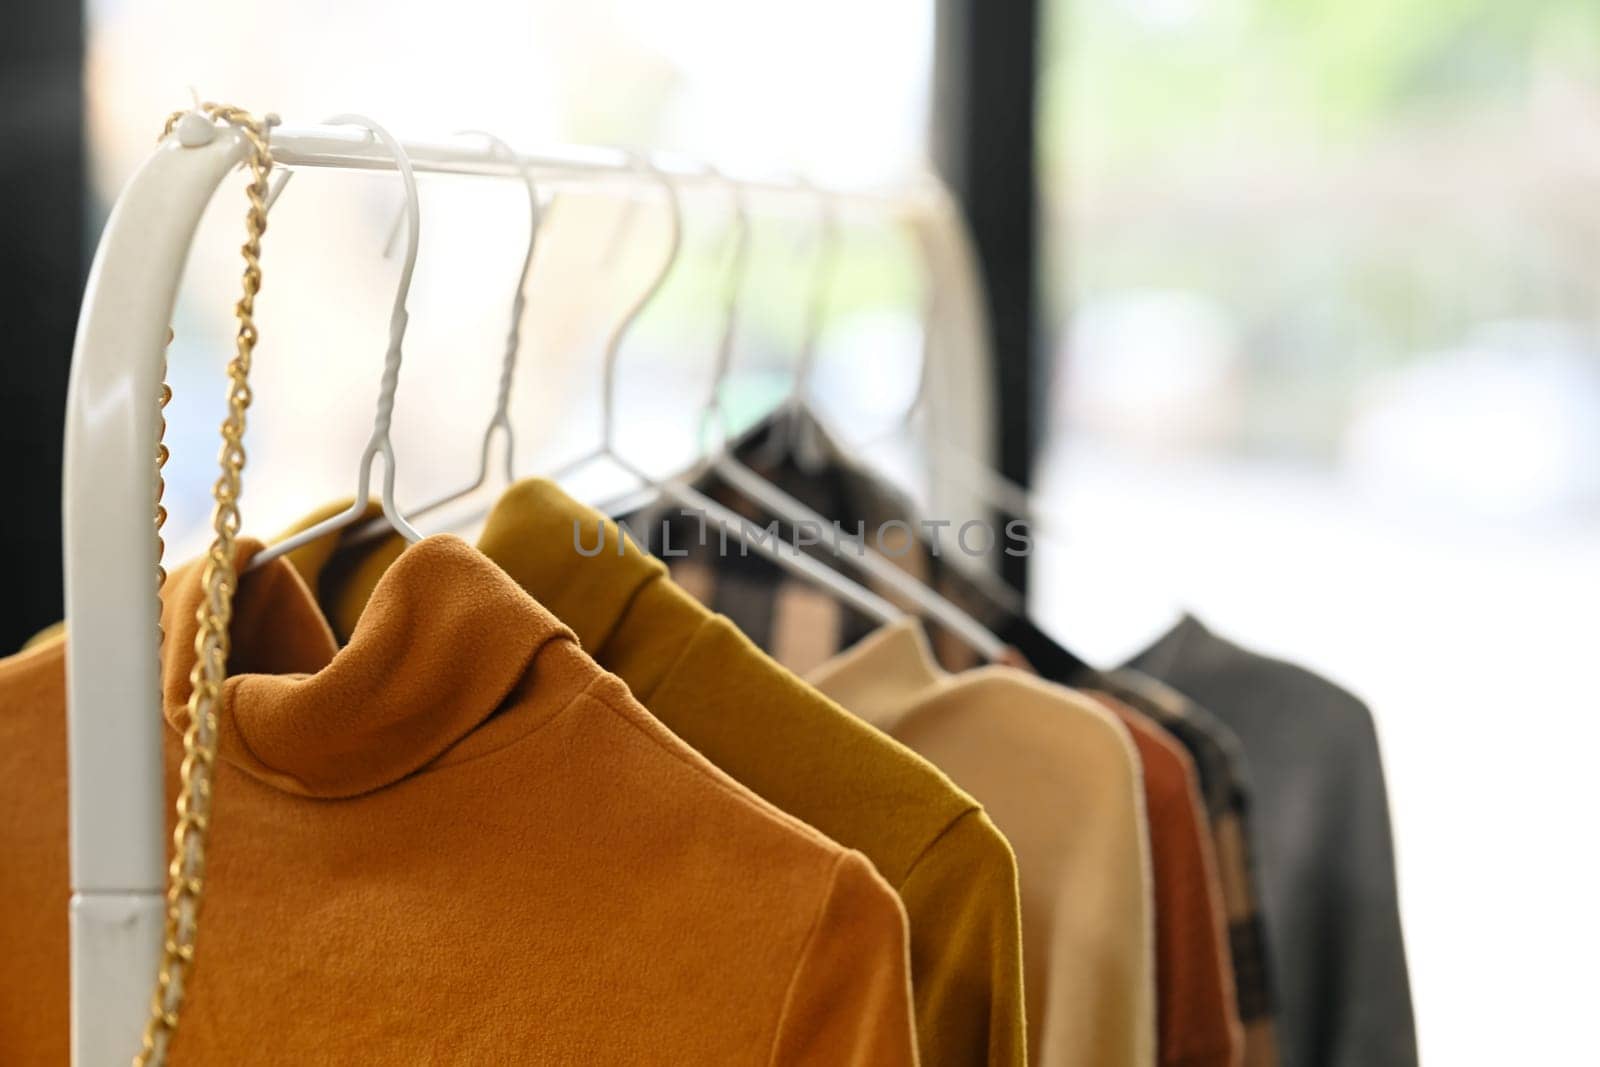 New collection of warm tones stylish clothes hanging on a rail in fashion design studio.